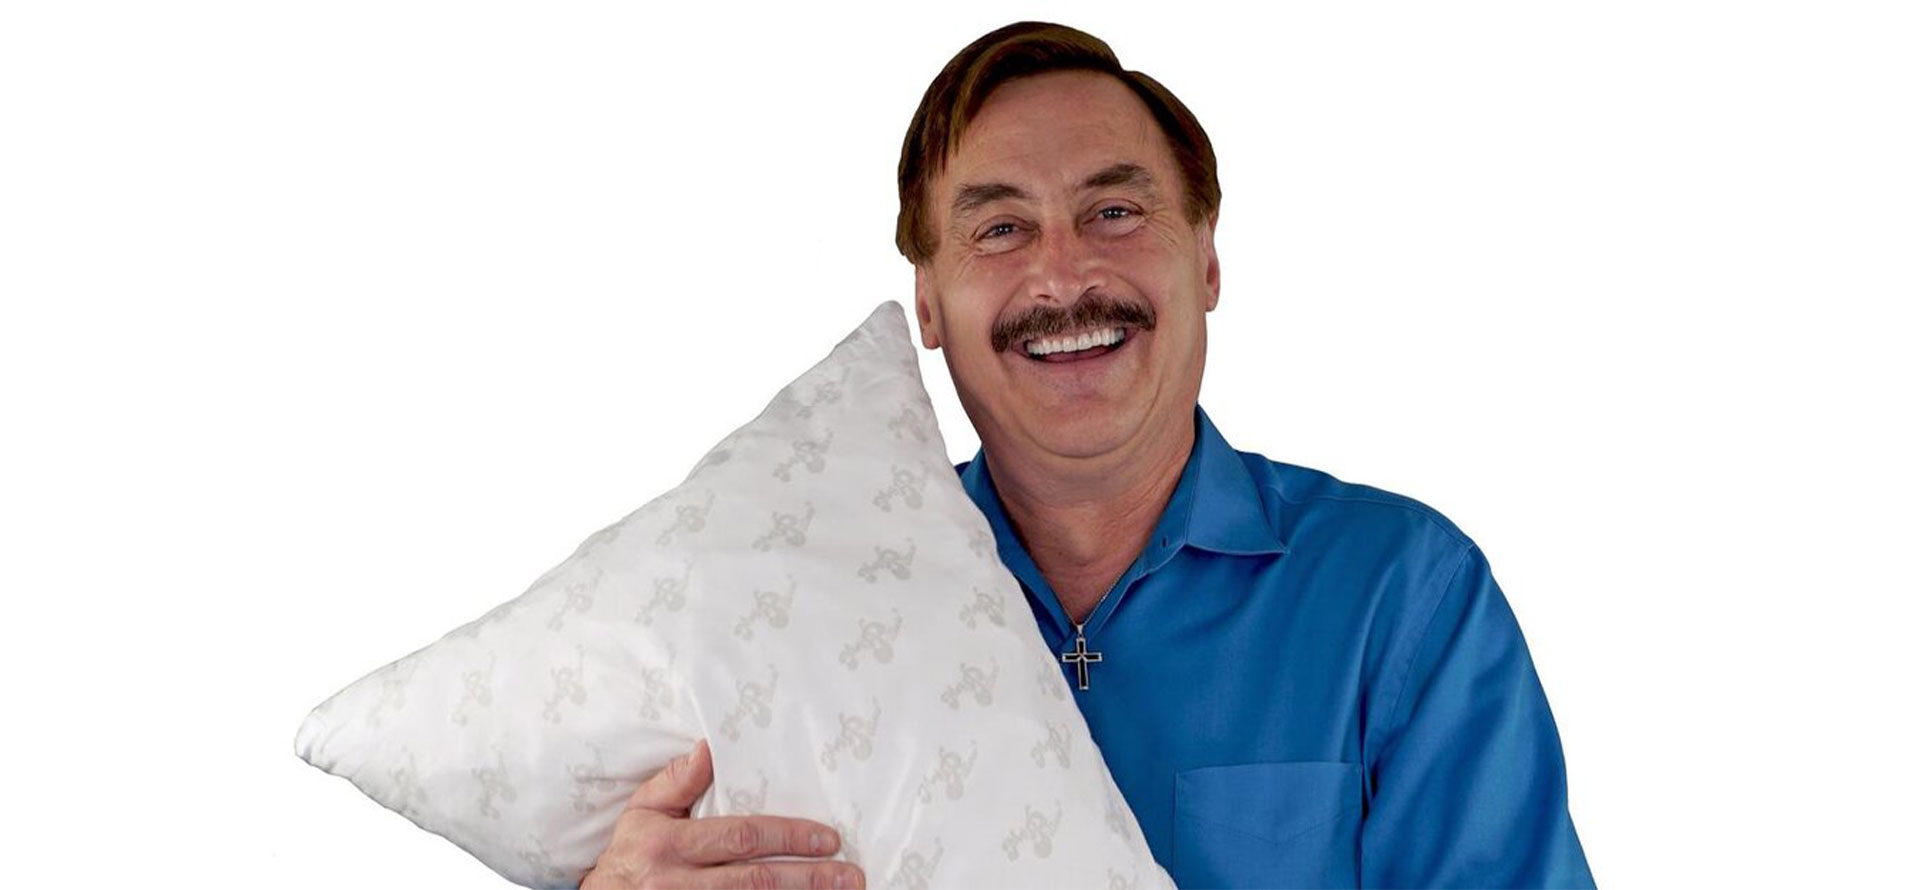 Man with My pillow.